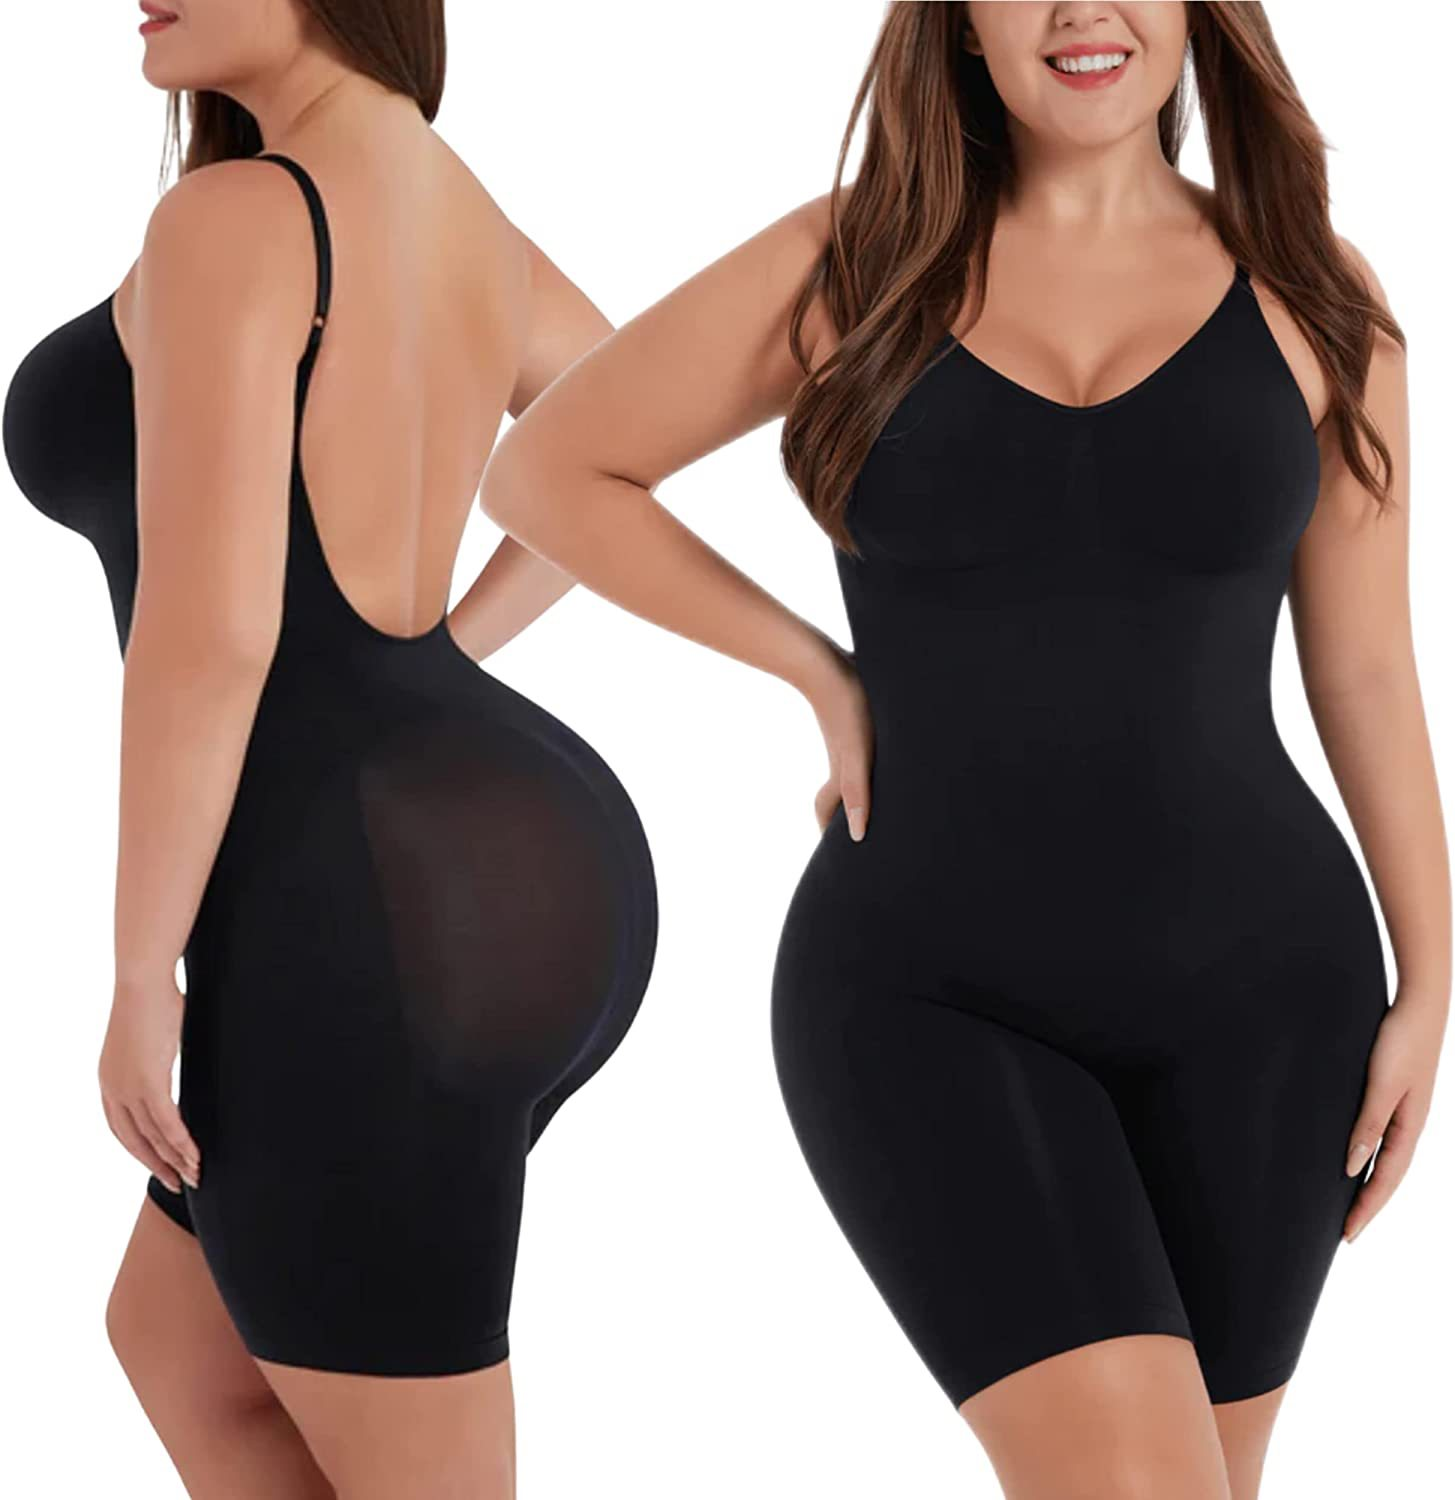 Kddylitq Cloud Bras Smoothing Seamless Full Bodysuit High Impact